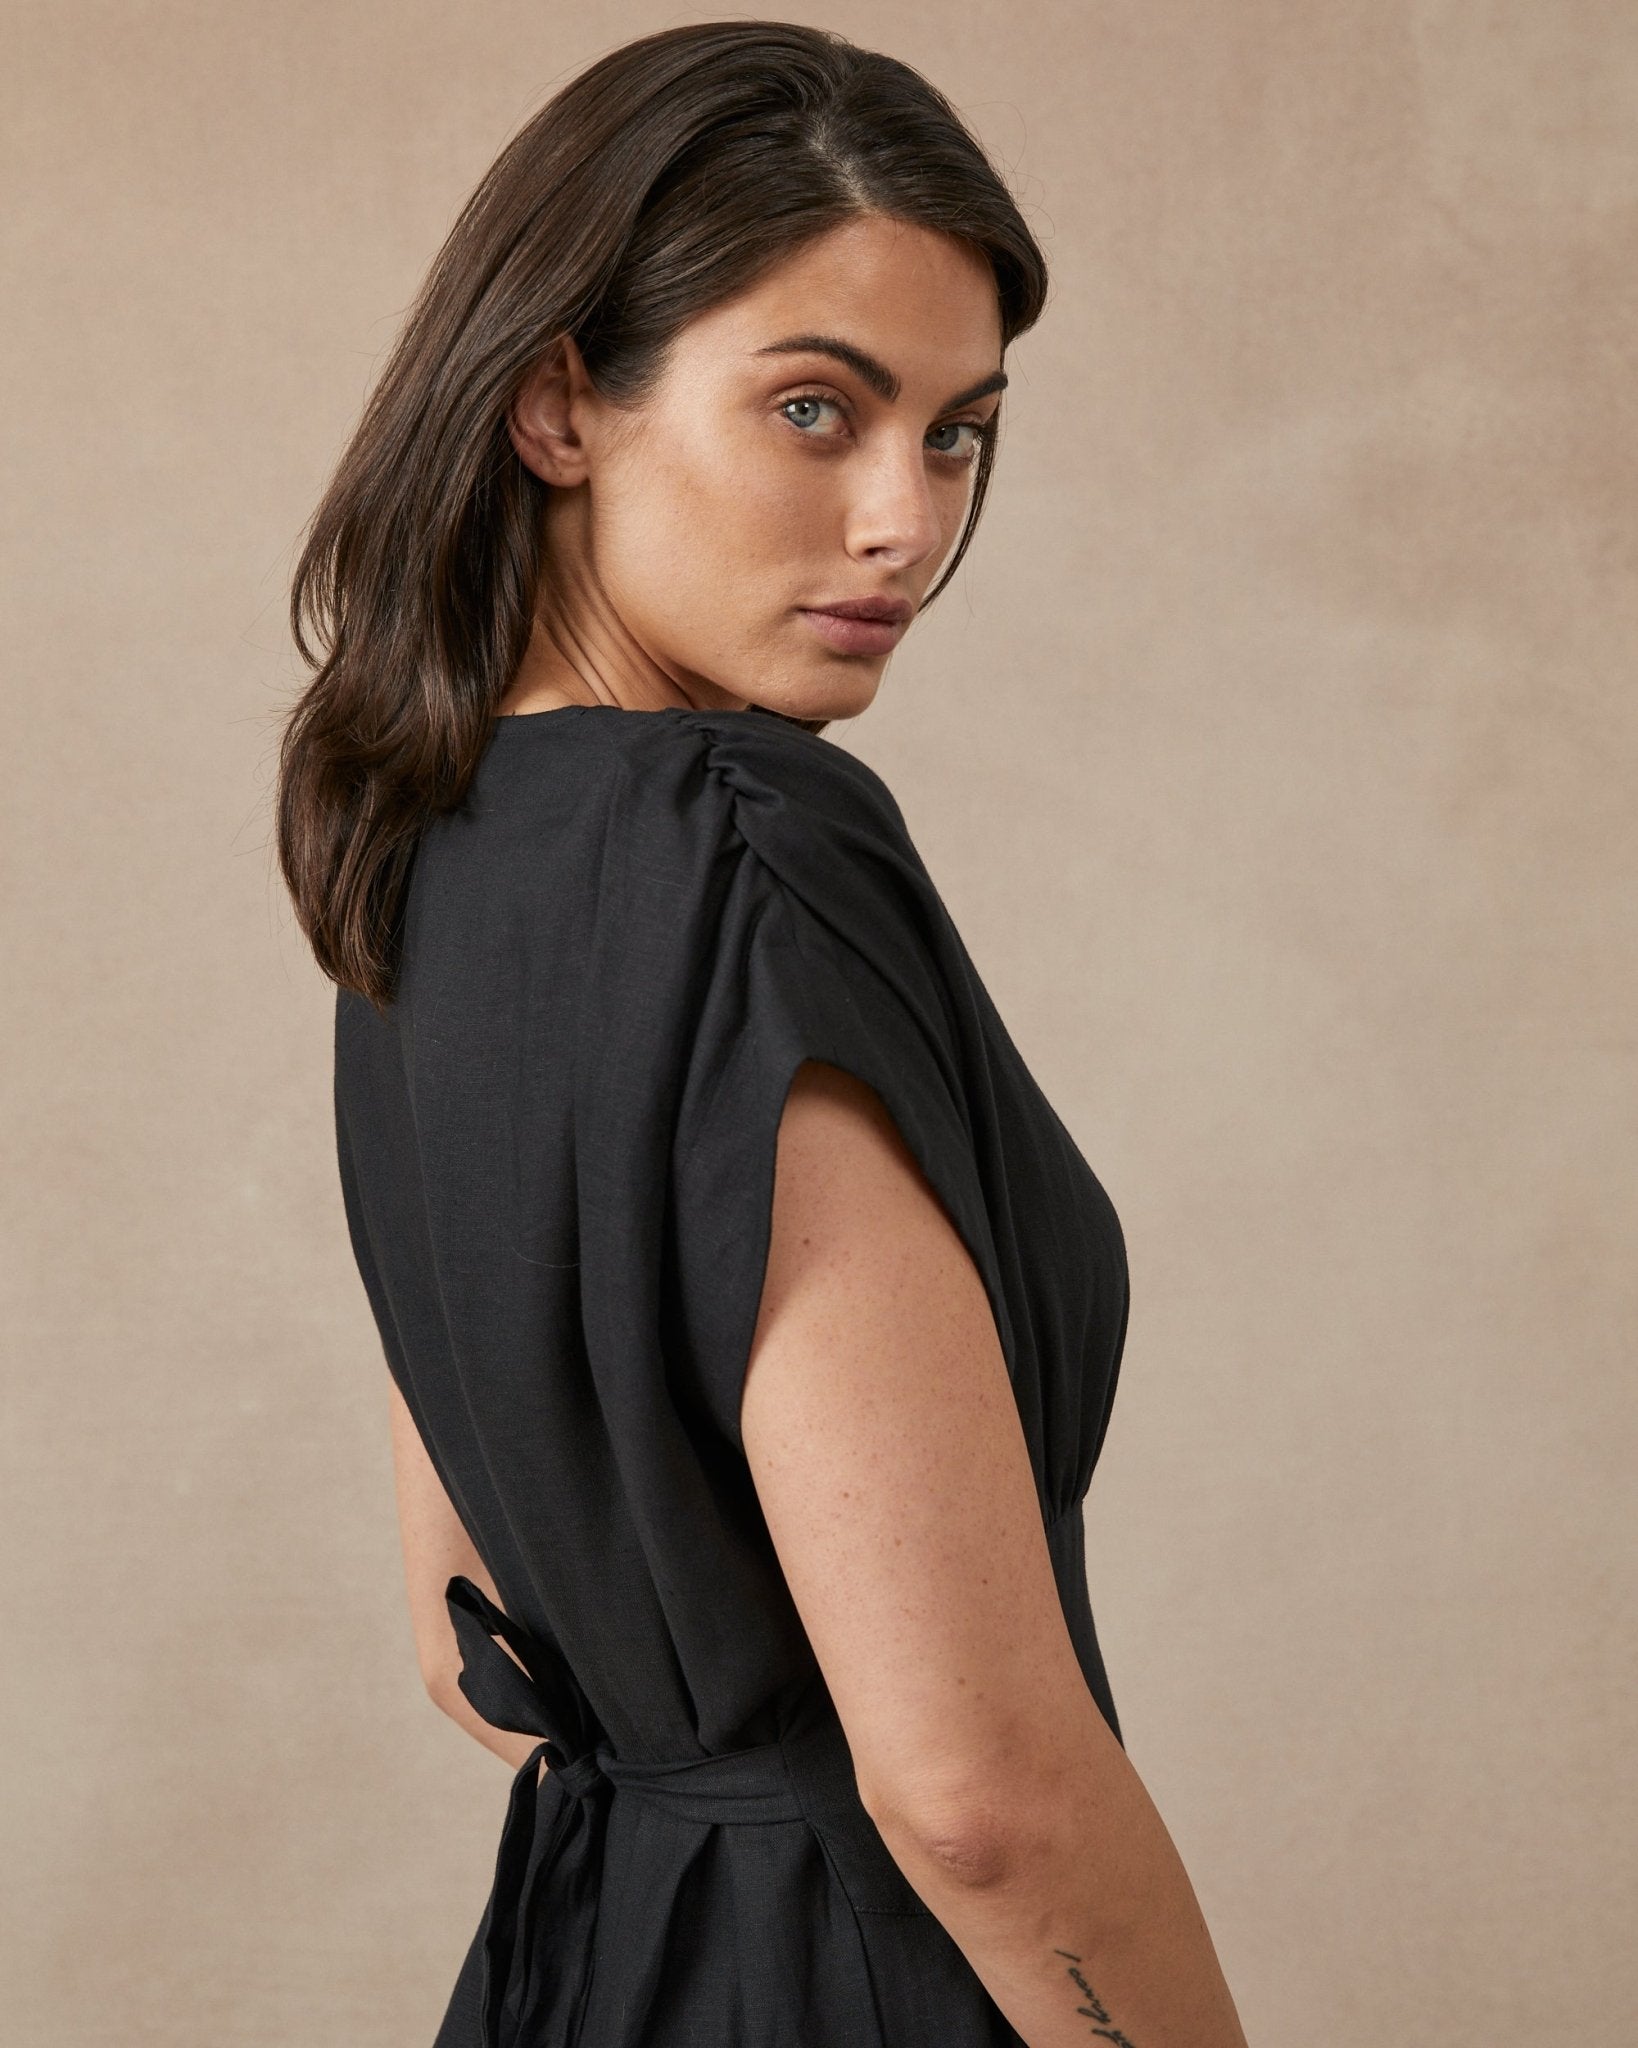 Shop Sammy Dress in Black Linen by Maggie The Label - Maggie The Label